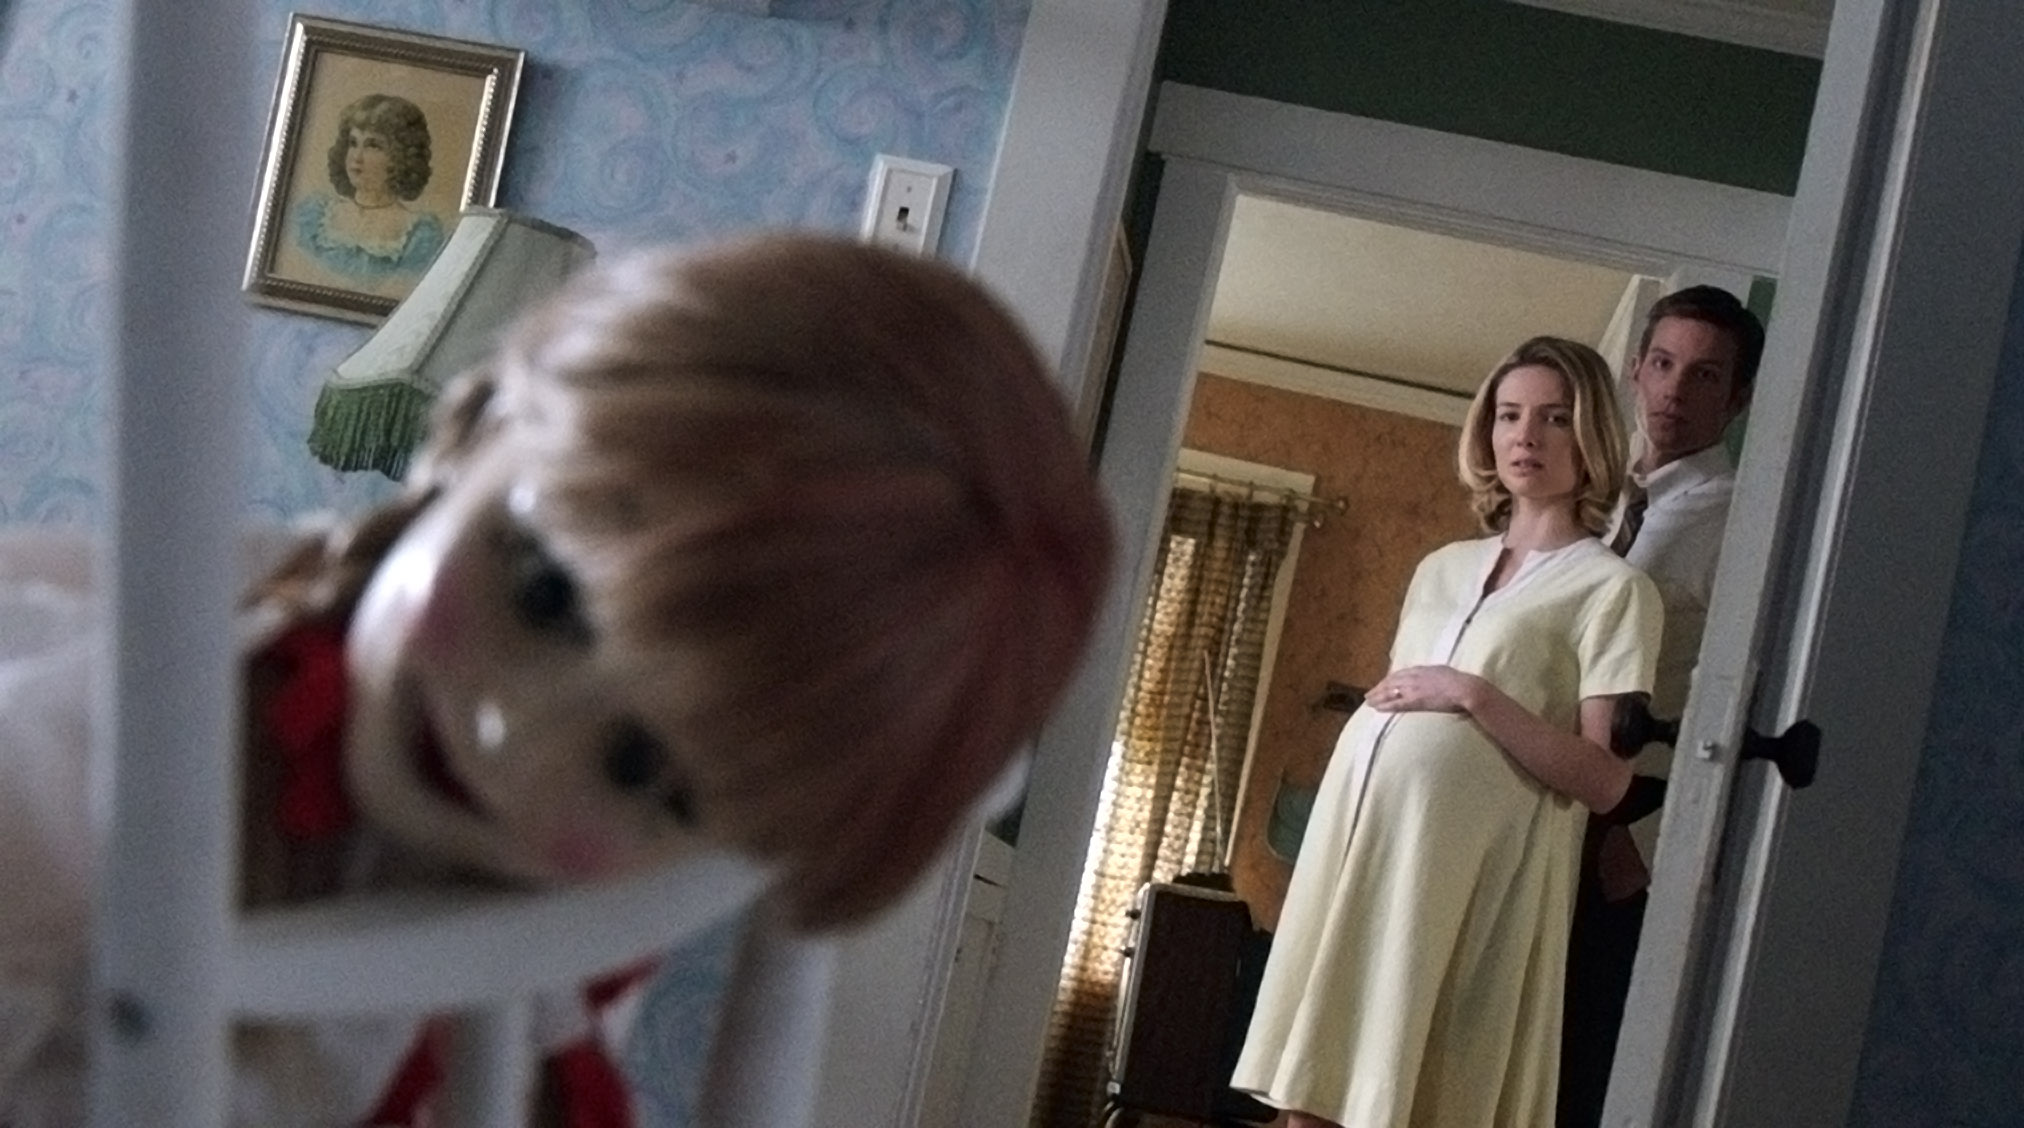 Annabelle - The Conjuring, Images 2014